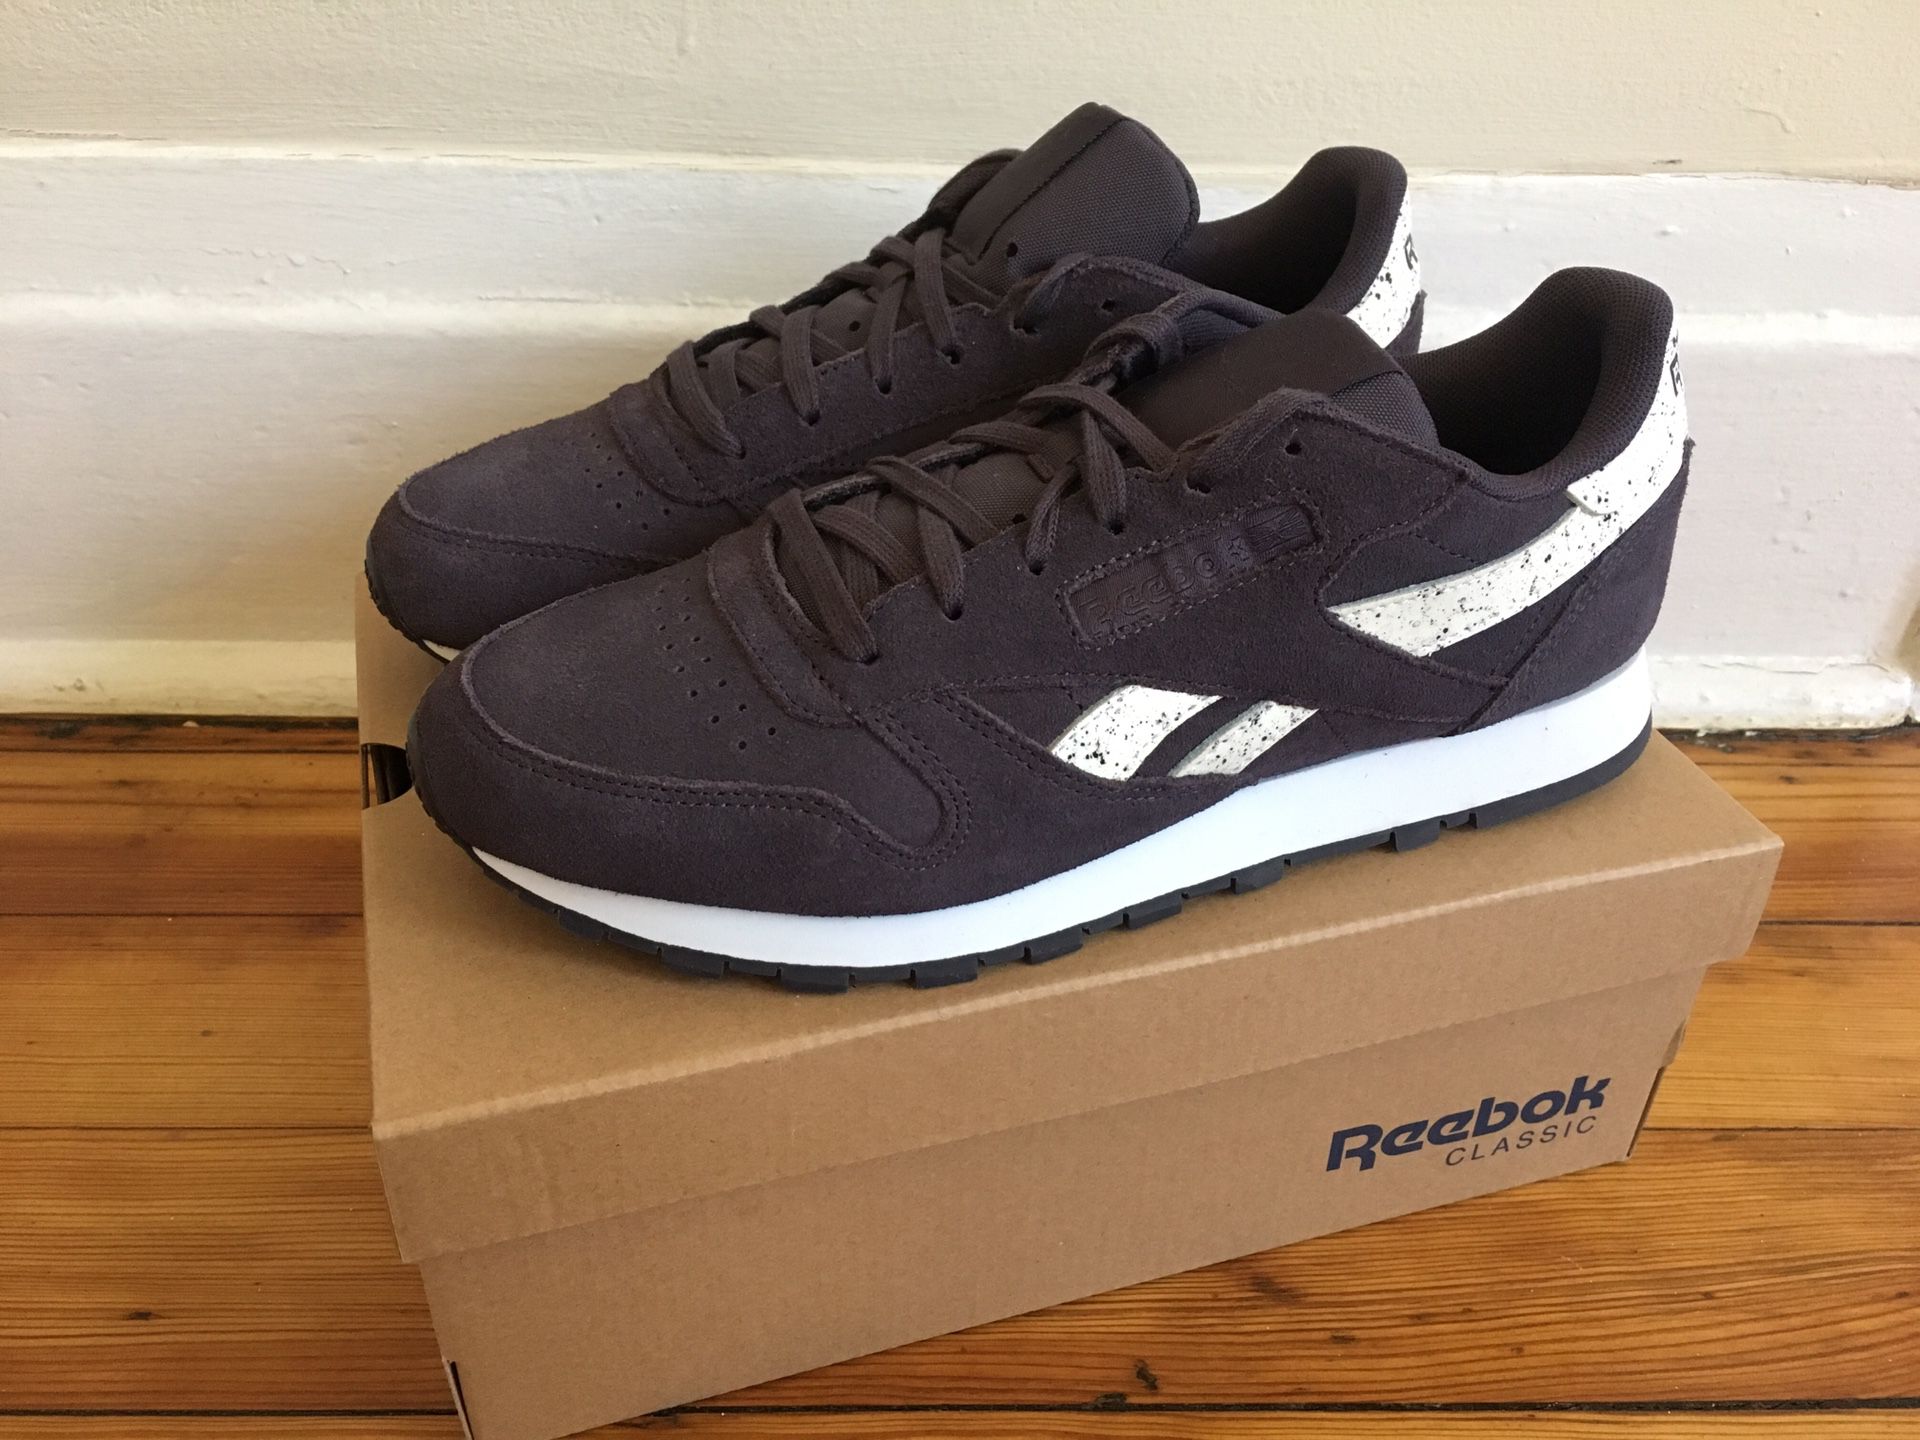 Reebok Classic suede leather sneakers NEW